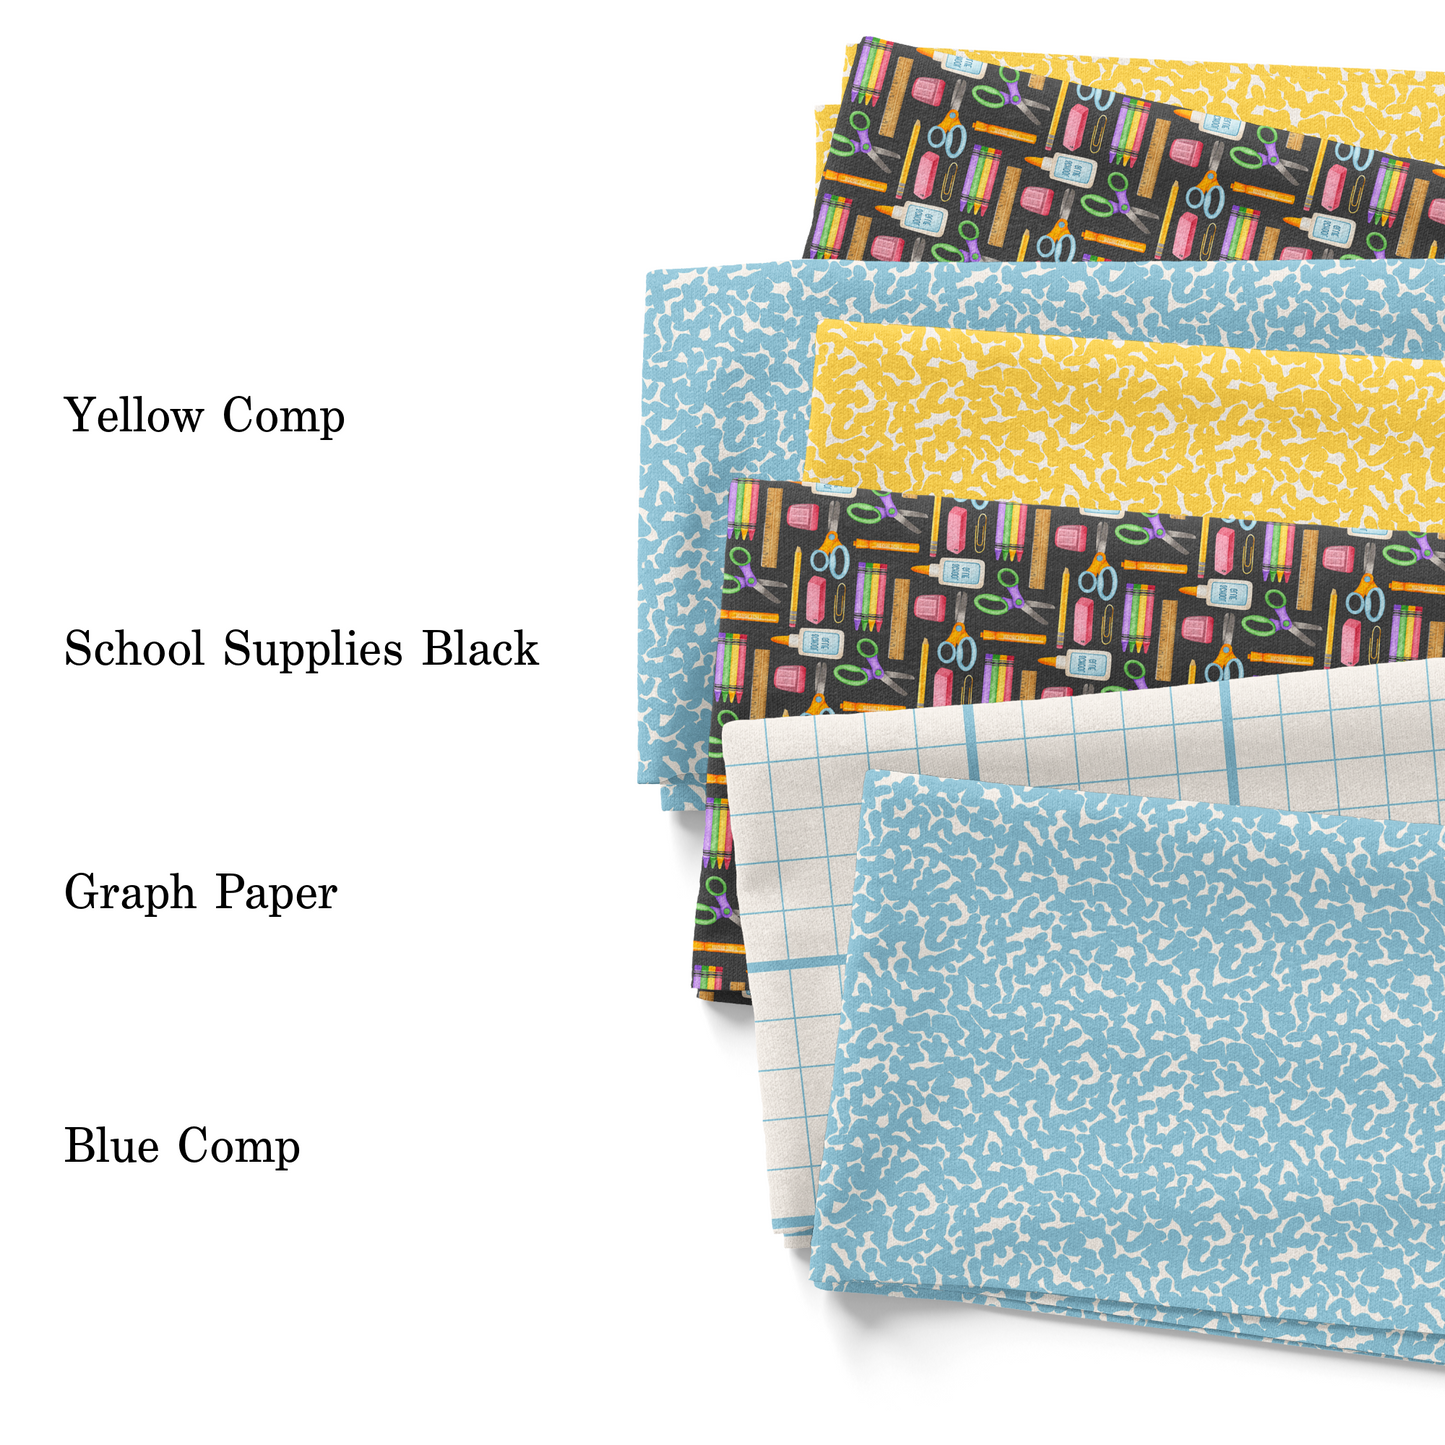 Krystal Winn back to school fabric collection swatches with pattern names.